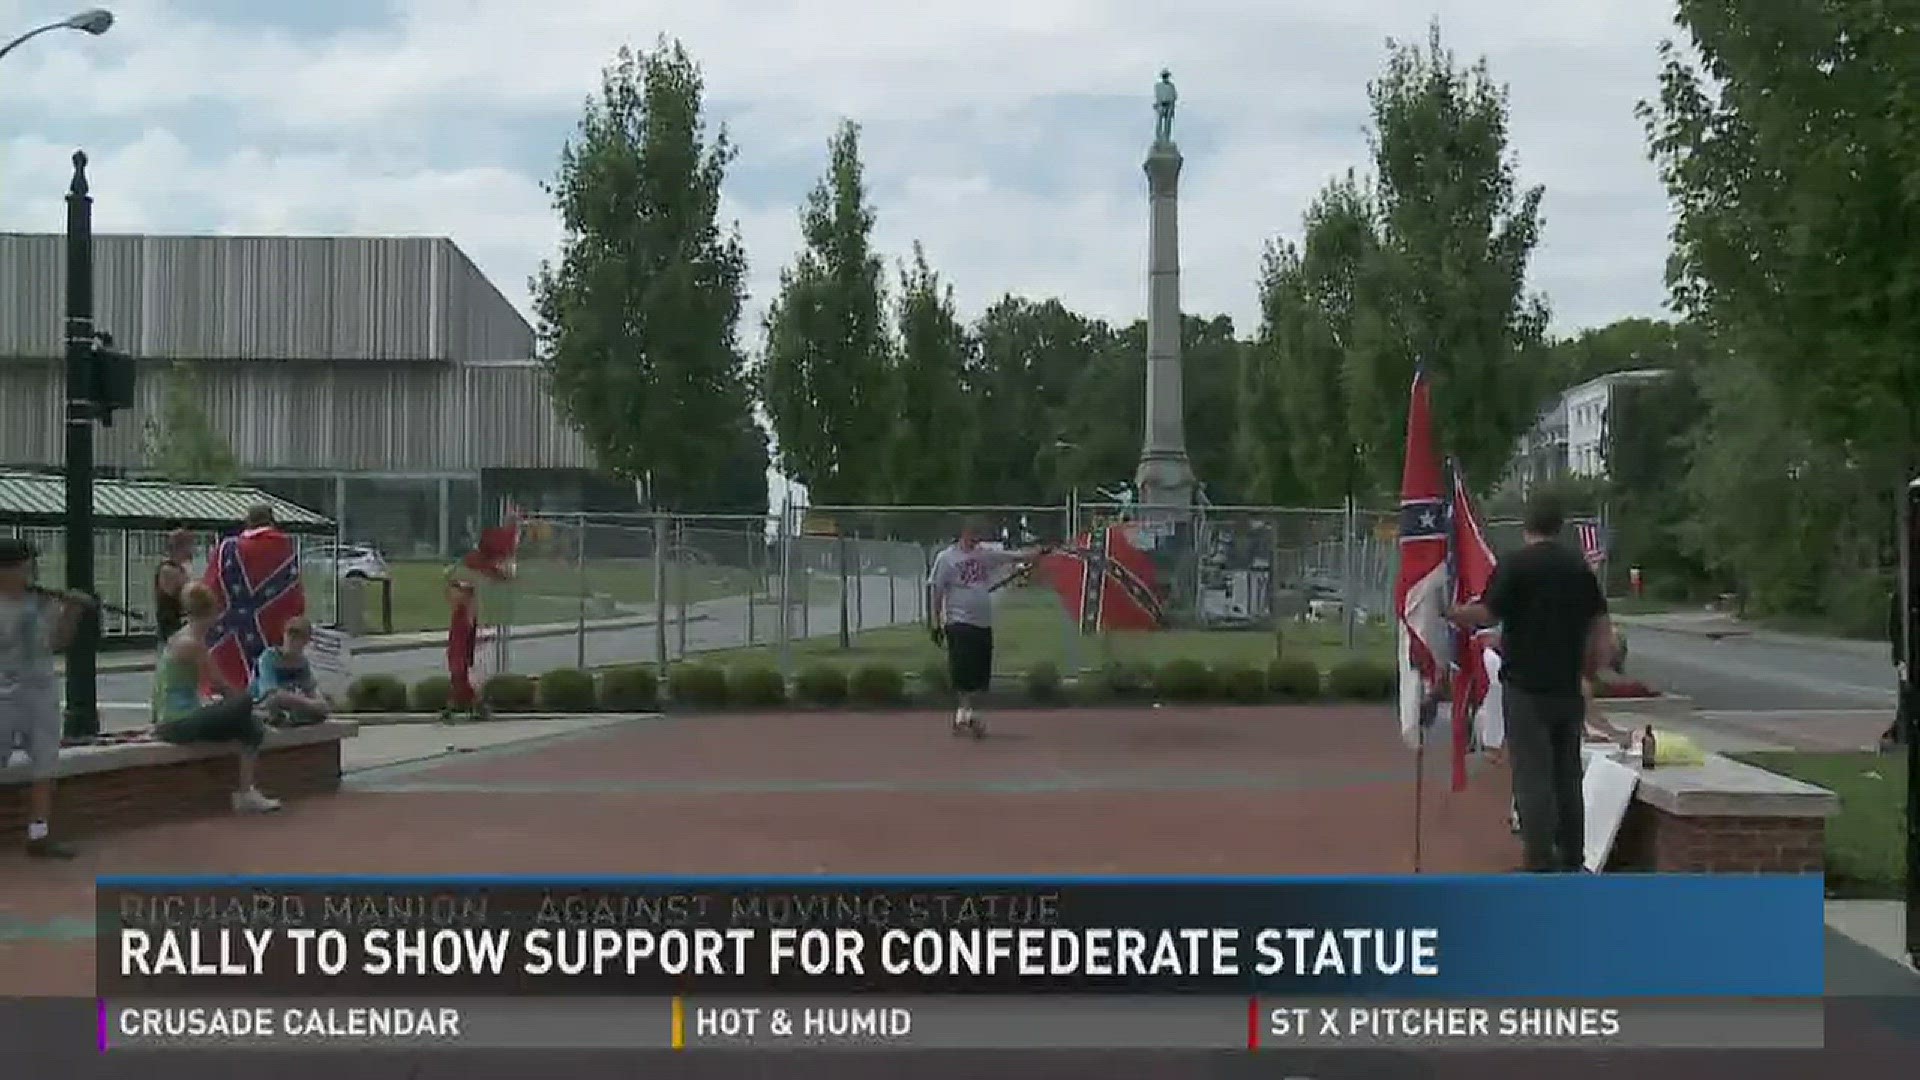 A small group gathered at the Confederate Veteran's statue near the University of Louisville campus to protest the removal of the statue.